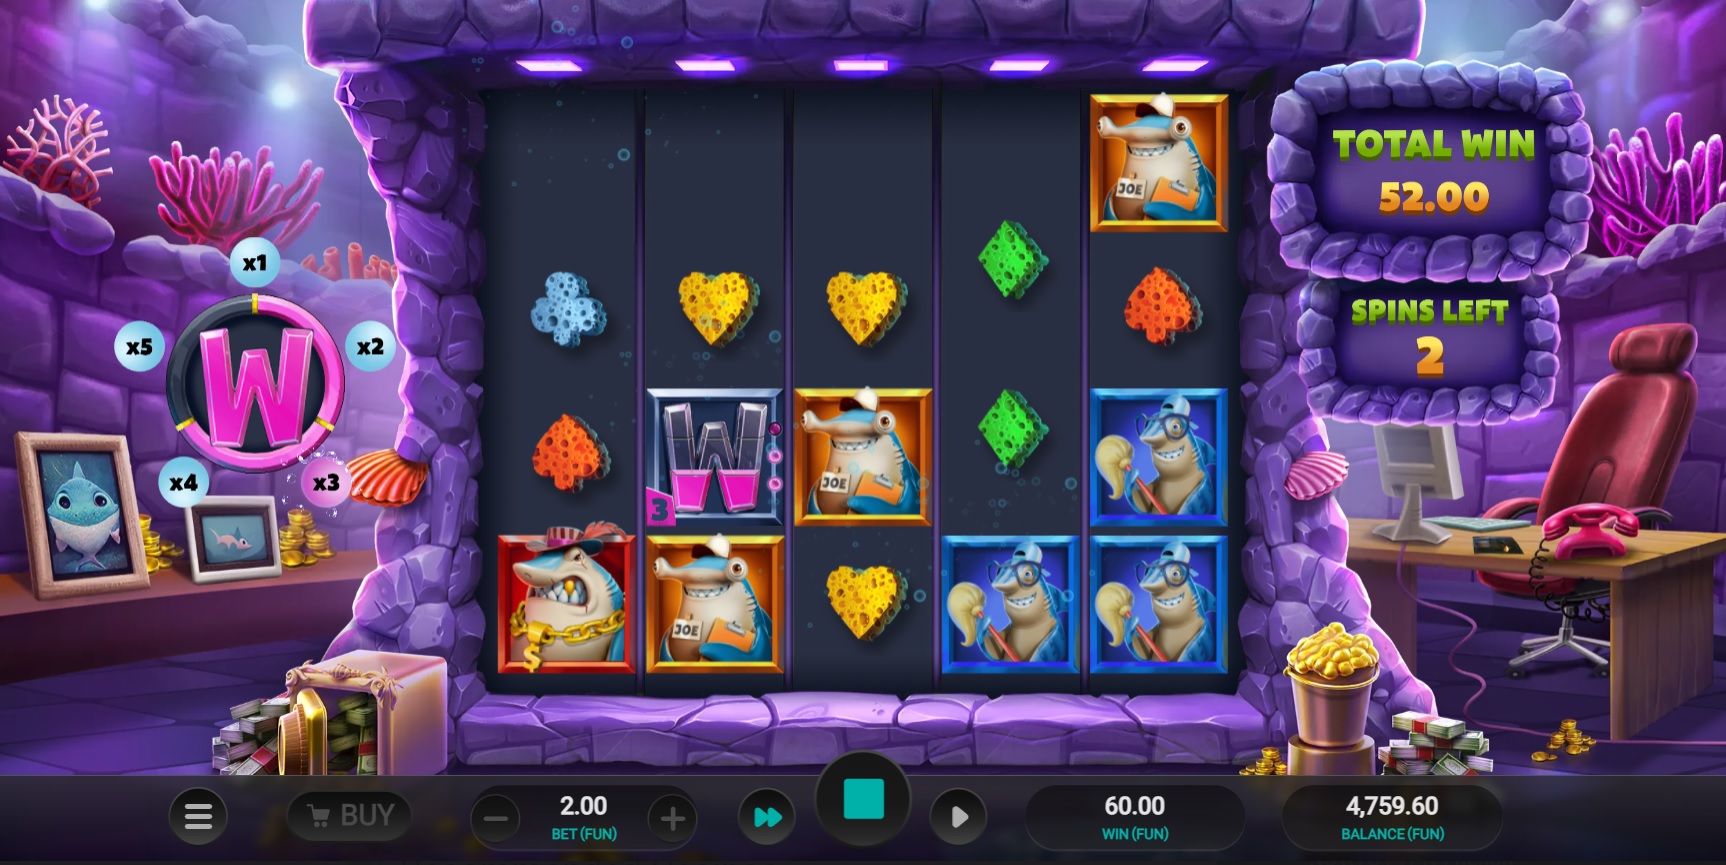 Shark Wash, Free spins feature